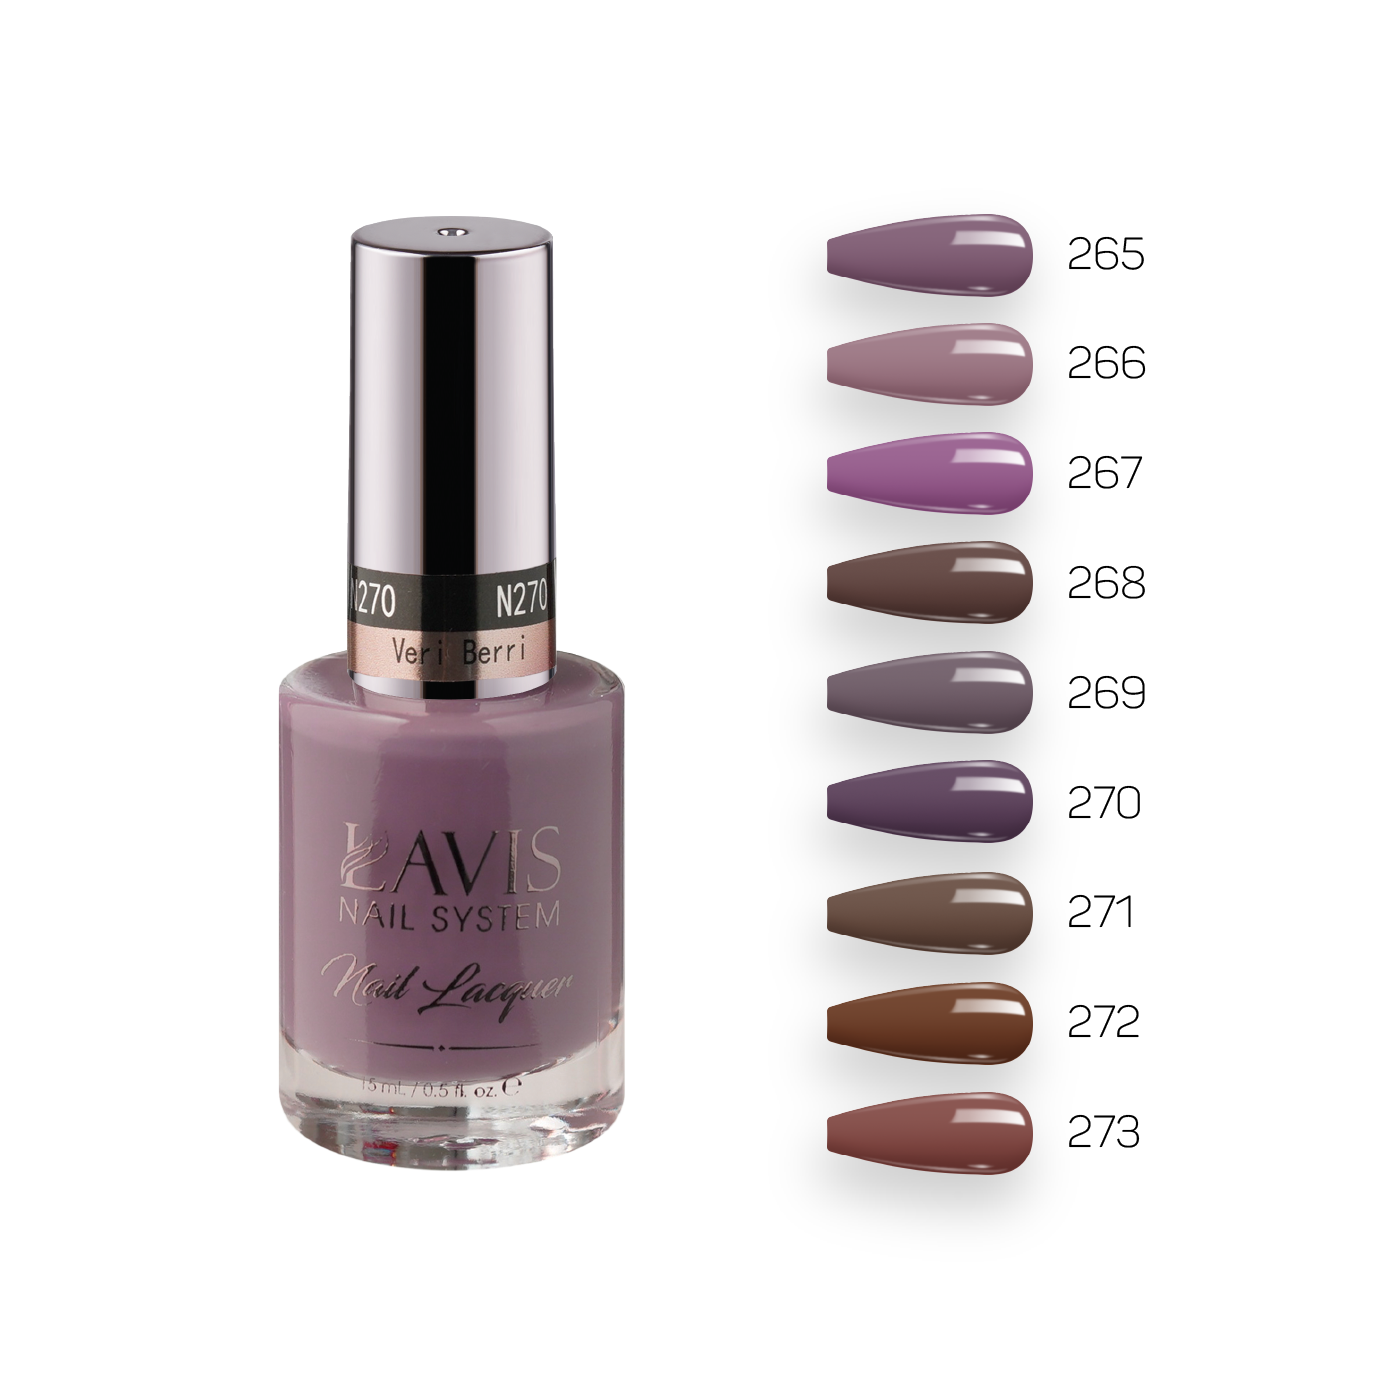 Lavis Healthy Nail Lacquer Fall Winter Set N4 (9 colors) : 265, 266, 267, 268, 269, 270, 271, 272, 273